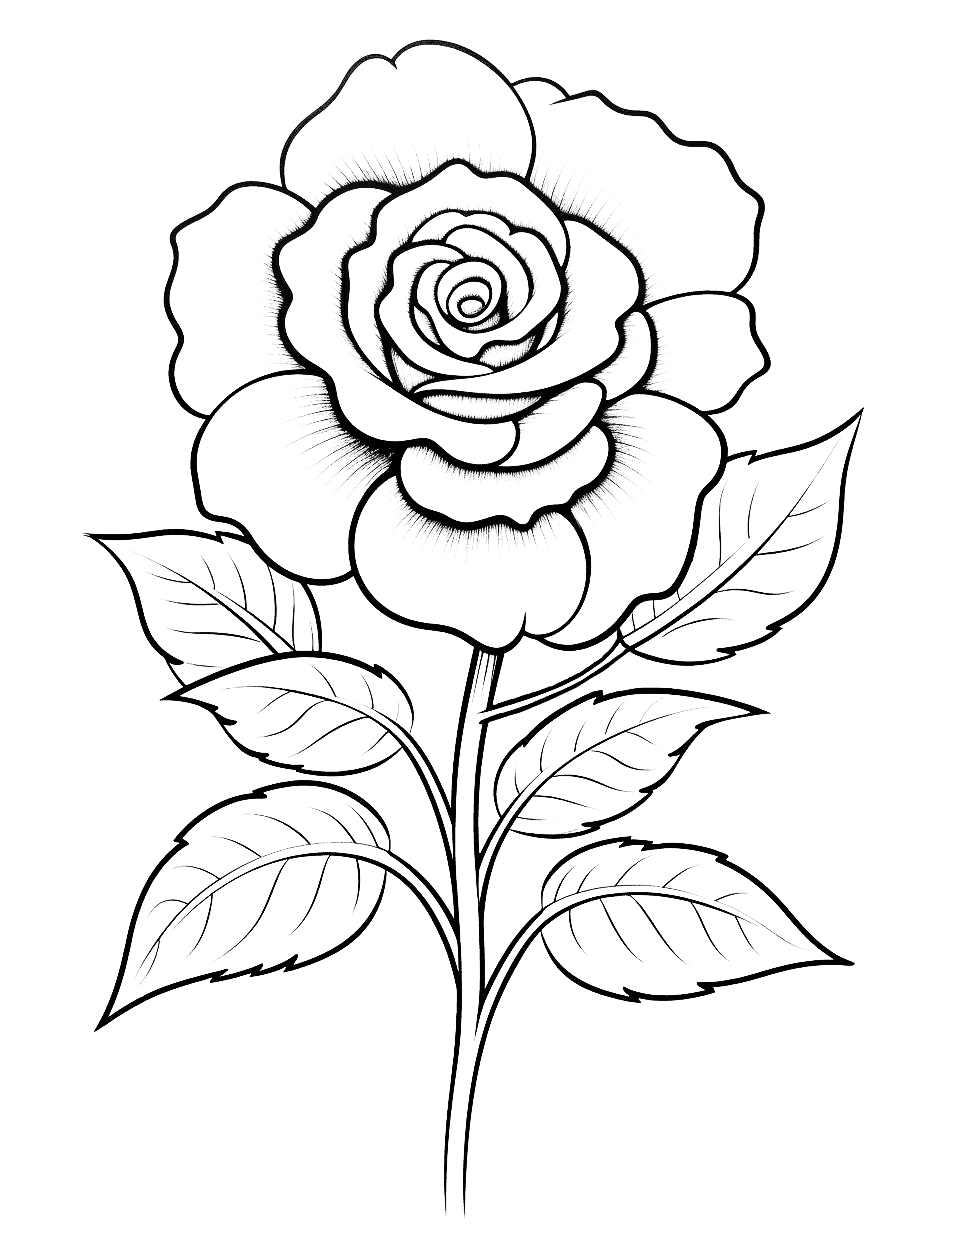 Realistic Rose for Stress Relief Flower Coloring Page - A detailed, realistic rose that can be colored for relaxation.